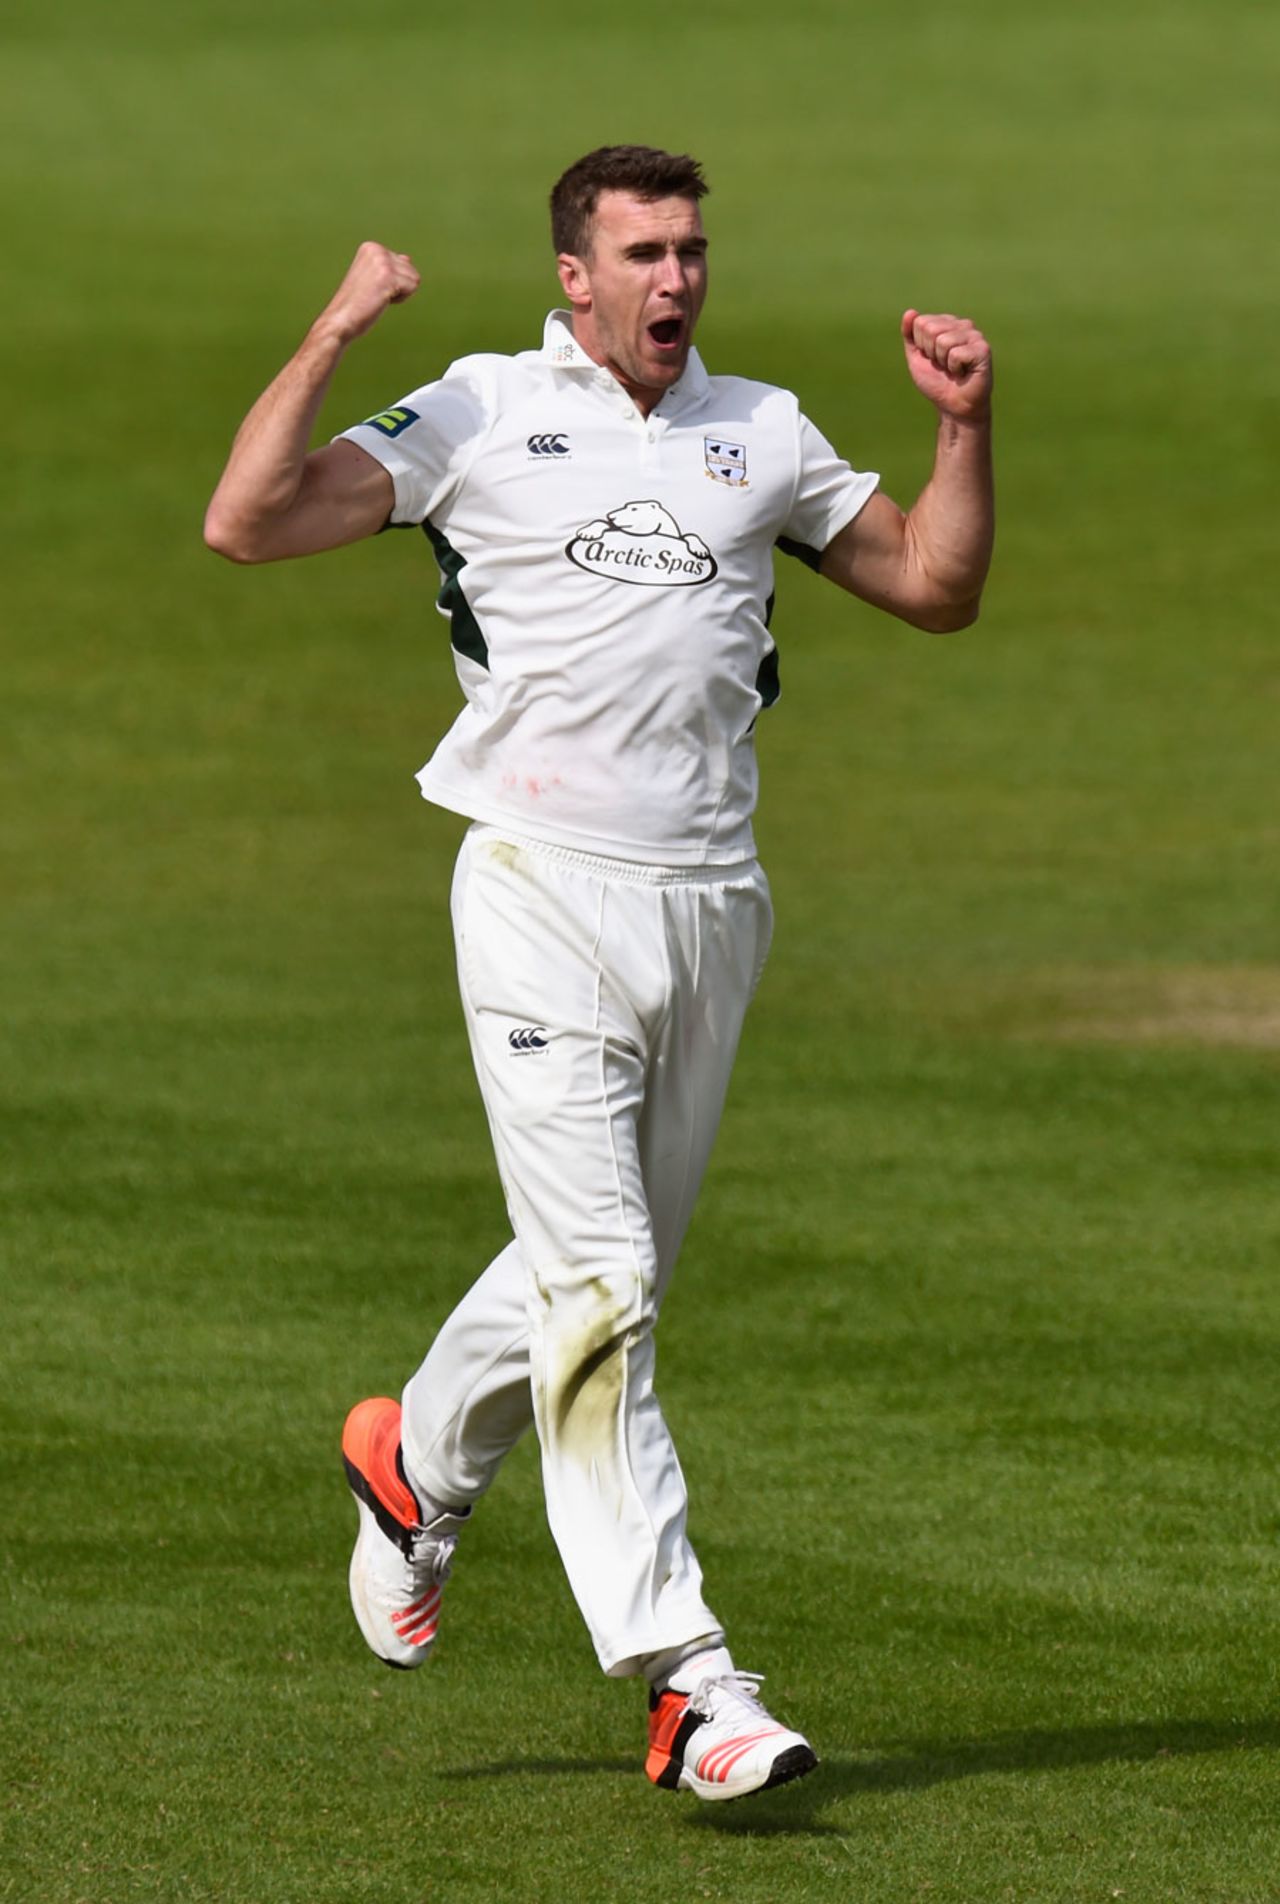 Jack Shantry celebrates a wicket, Worcestershire v Yorkshire, County Championship, Division One, New Road, 2nd day, April 13, 2015